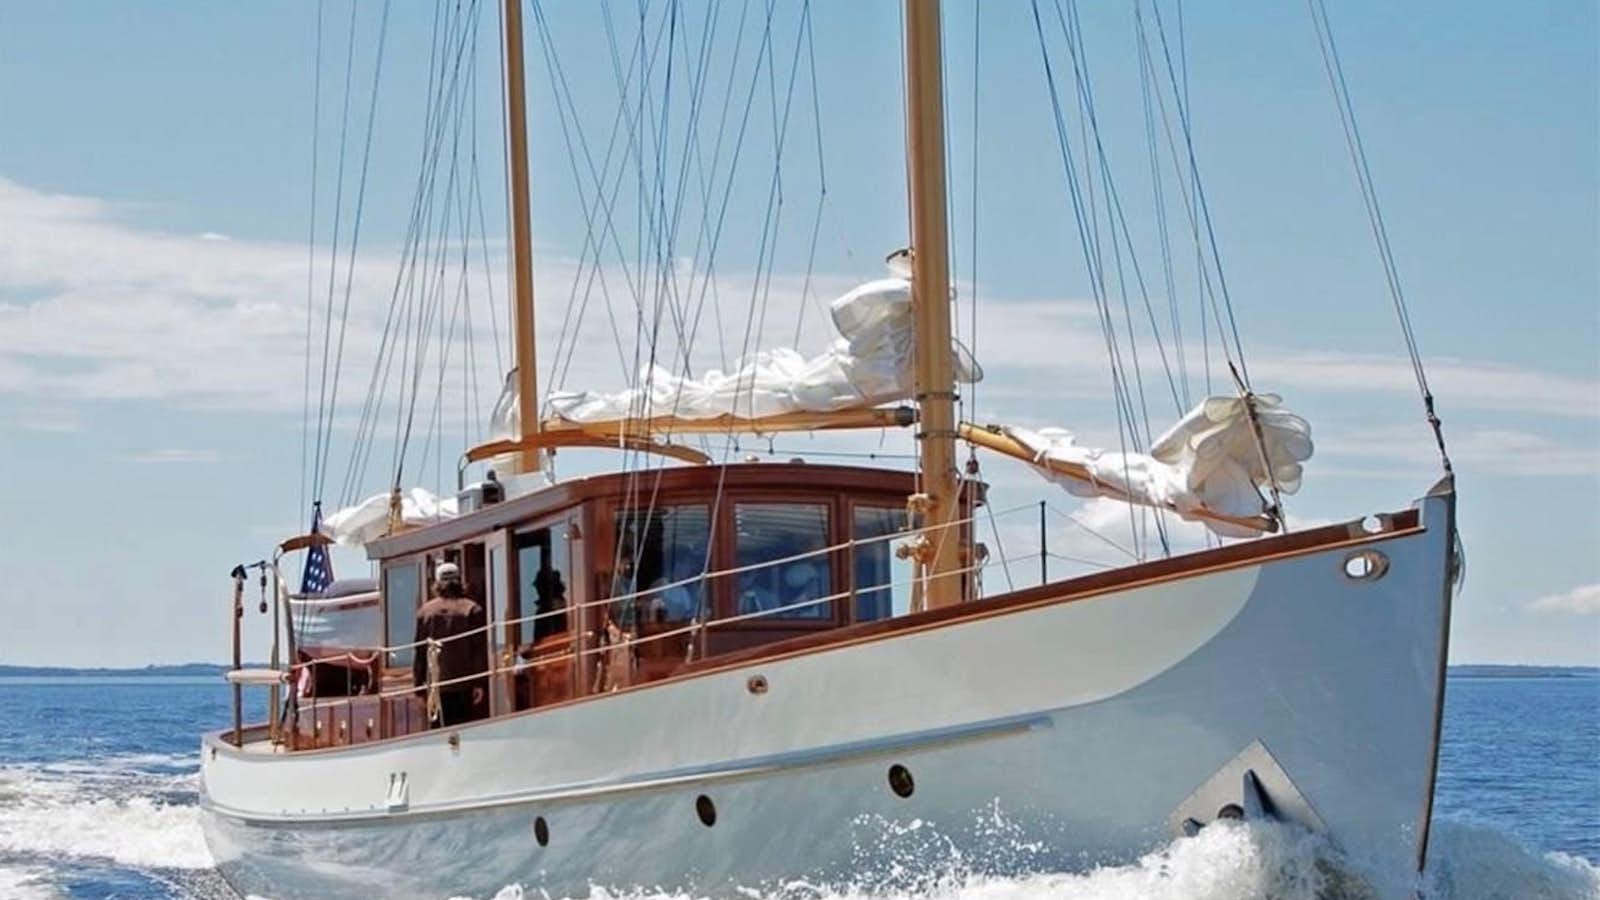 Watch Video for TRADE WIND Yacht for Sale